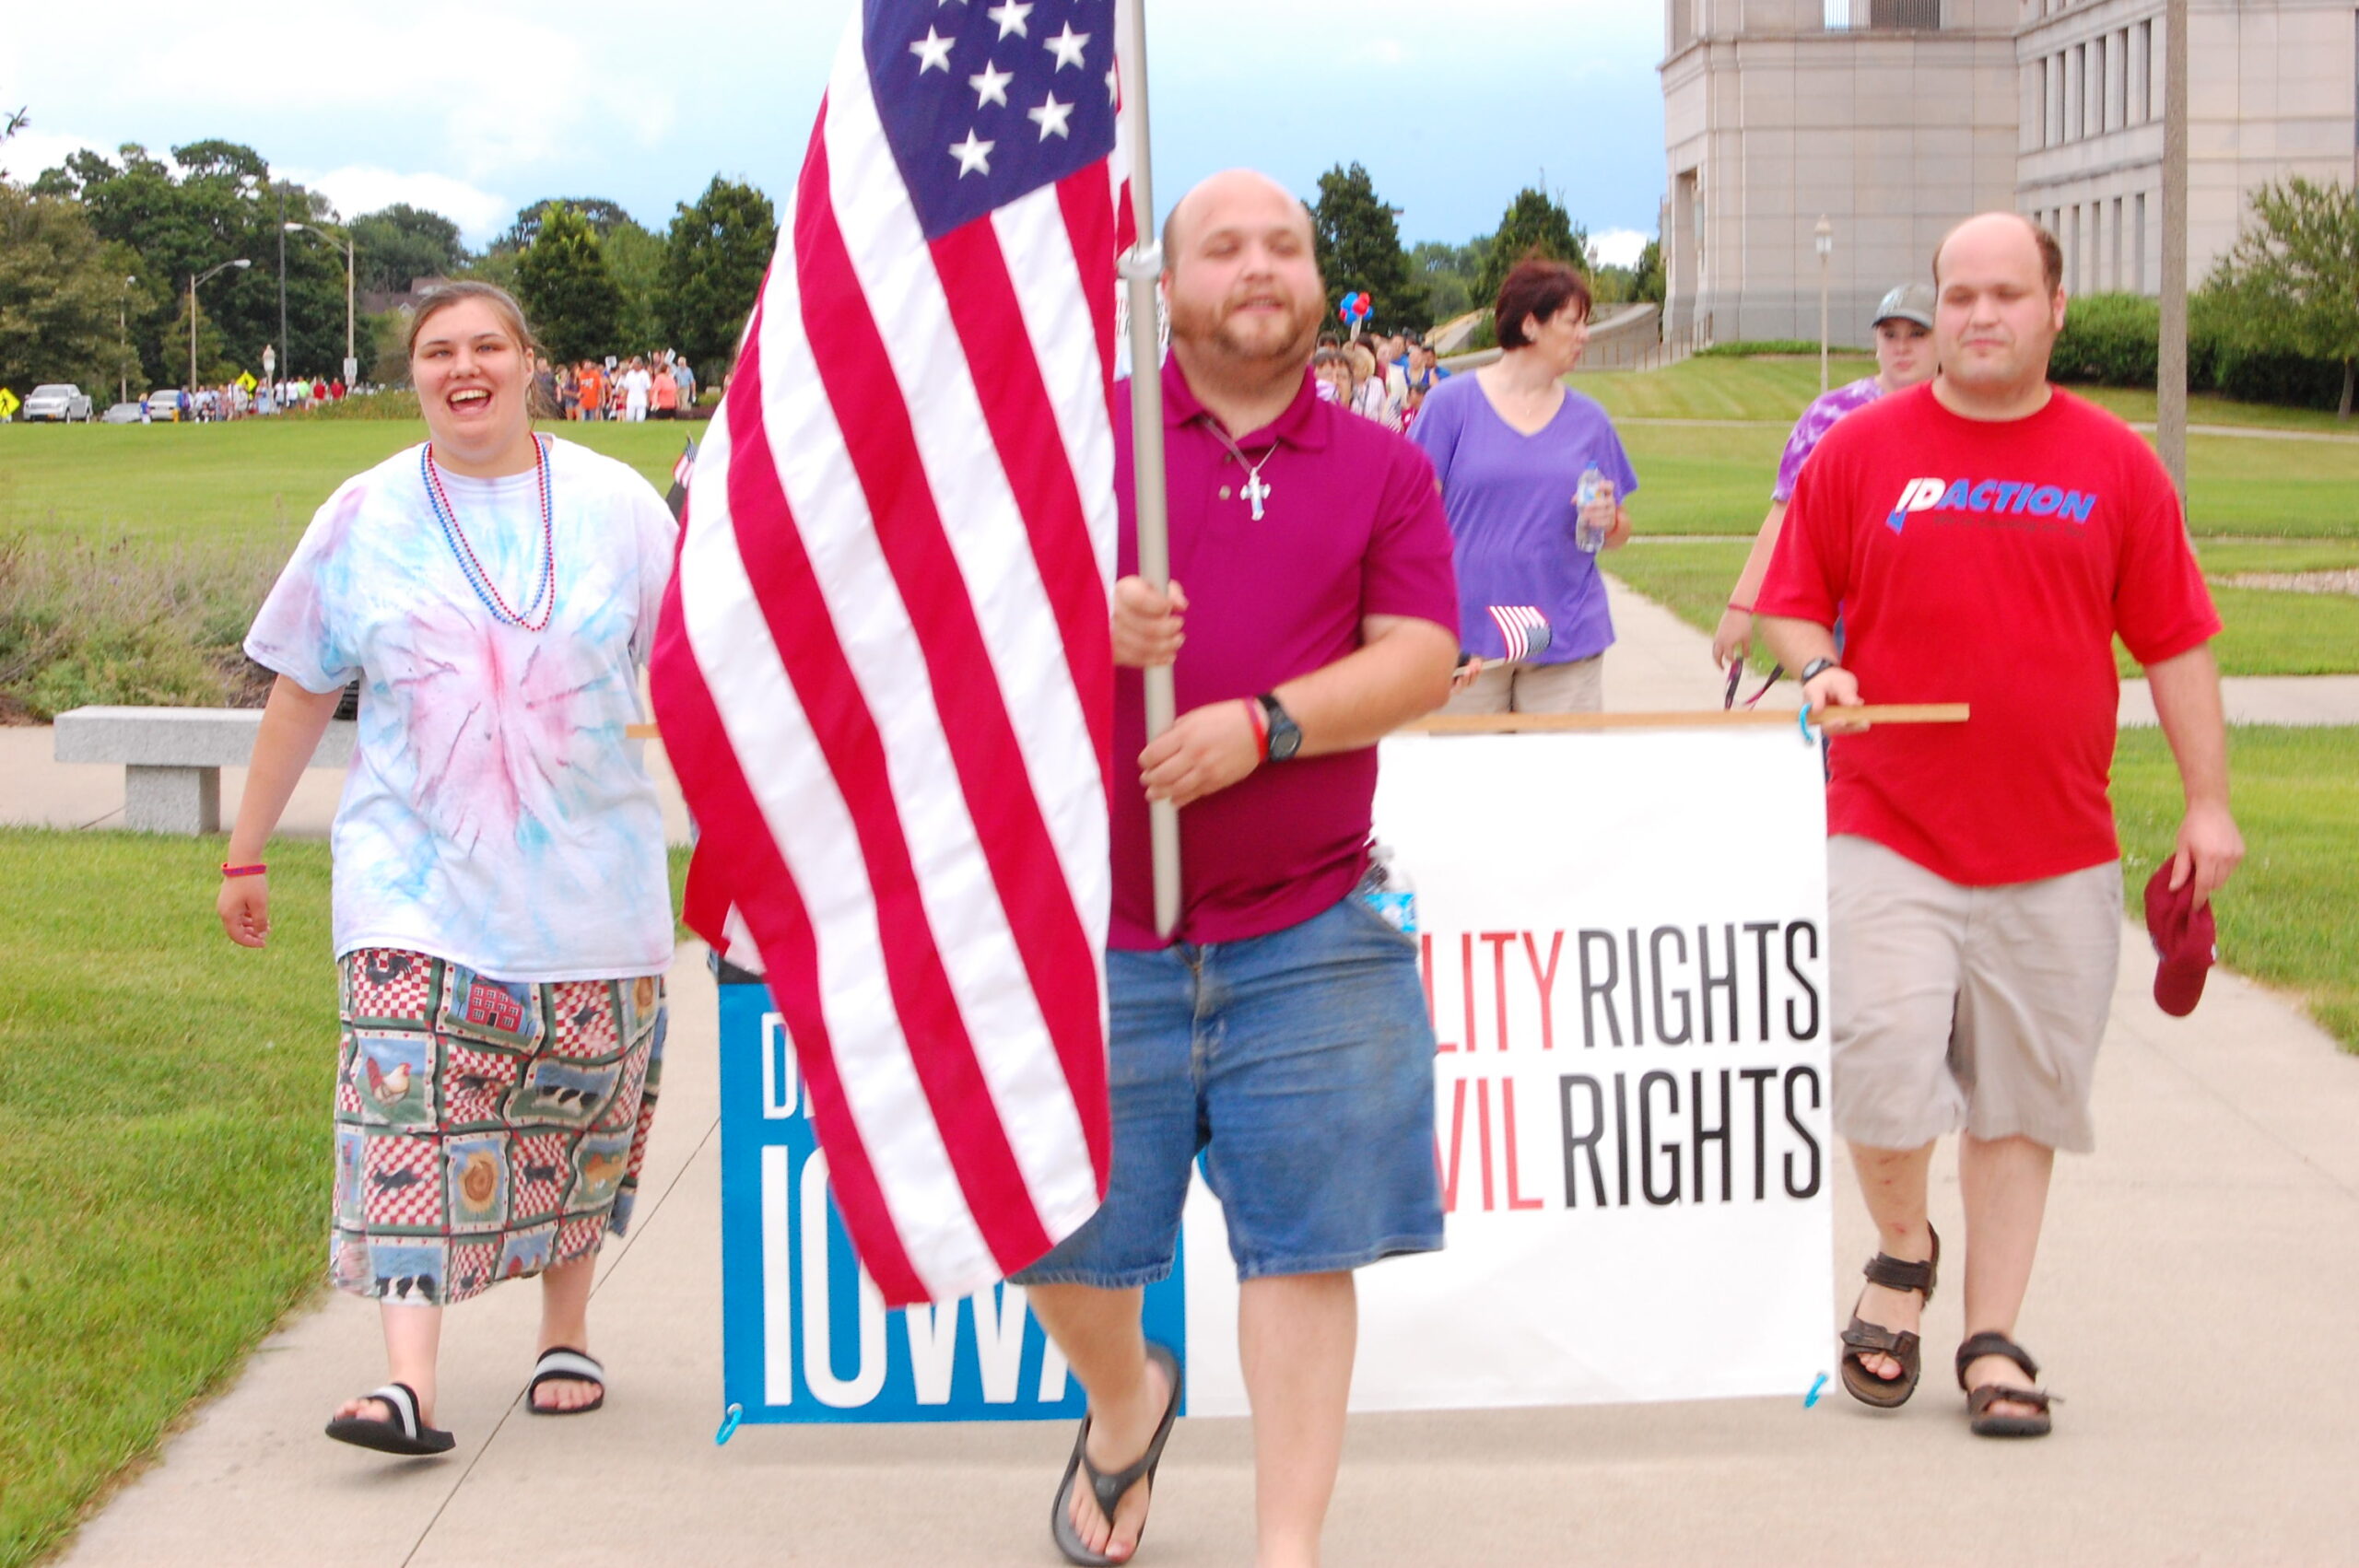 Image of a man walking with the American flag in his hands. He is in front of a group of people also walking in the same path, holding a "disability rights, civil rights" poster.